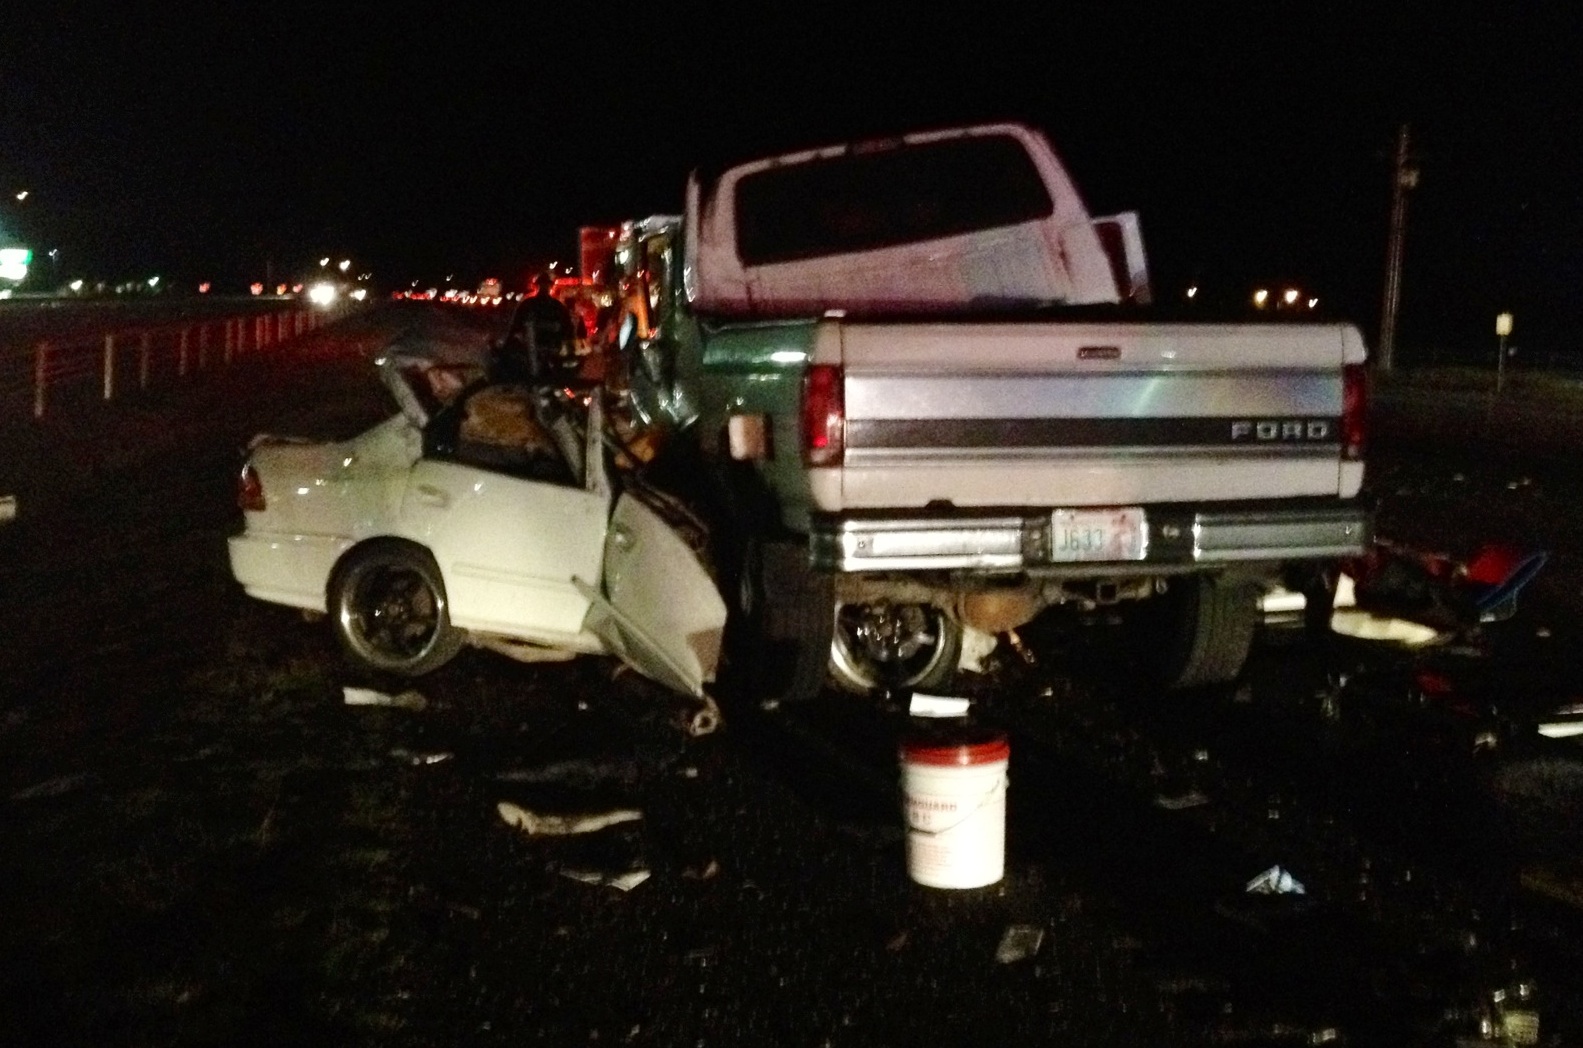 A wrong-way driver in a Honda Civic died early Saturday after the car crashed into an oncoming Ford F-250 on Interstate 5 near Woodland.